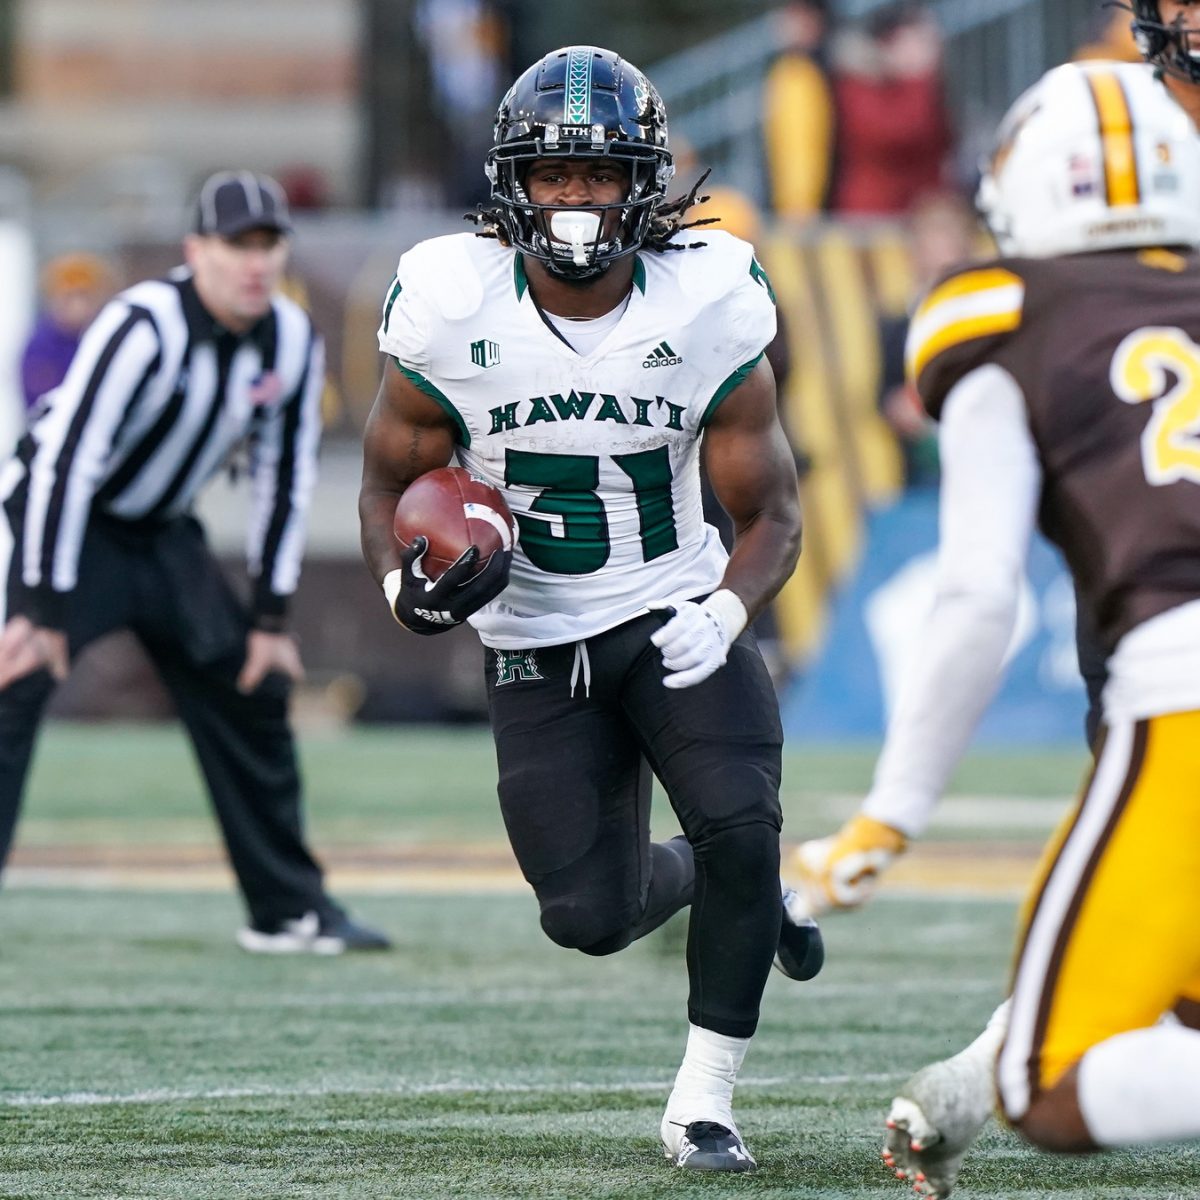 Western Kentucky vs. Hawaii Prediction, Preview, and Odds - 9-3-2022